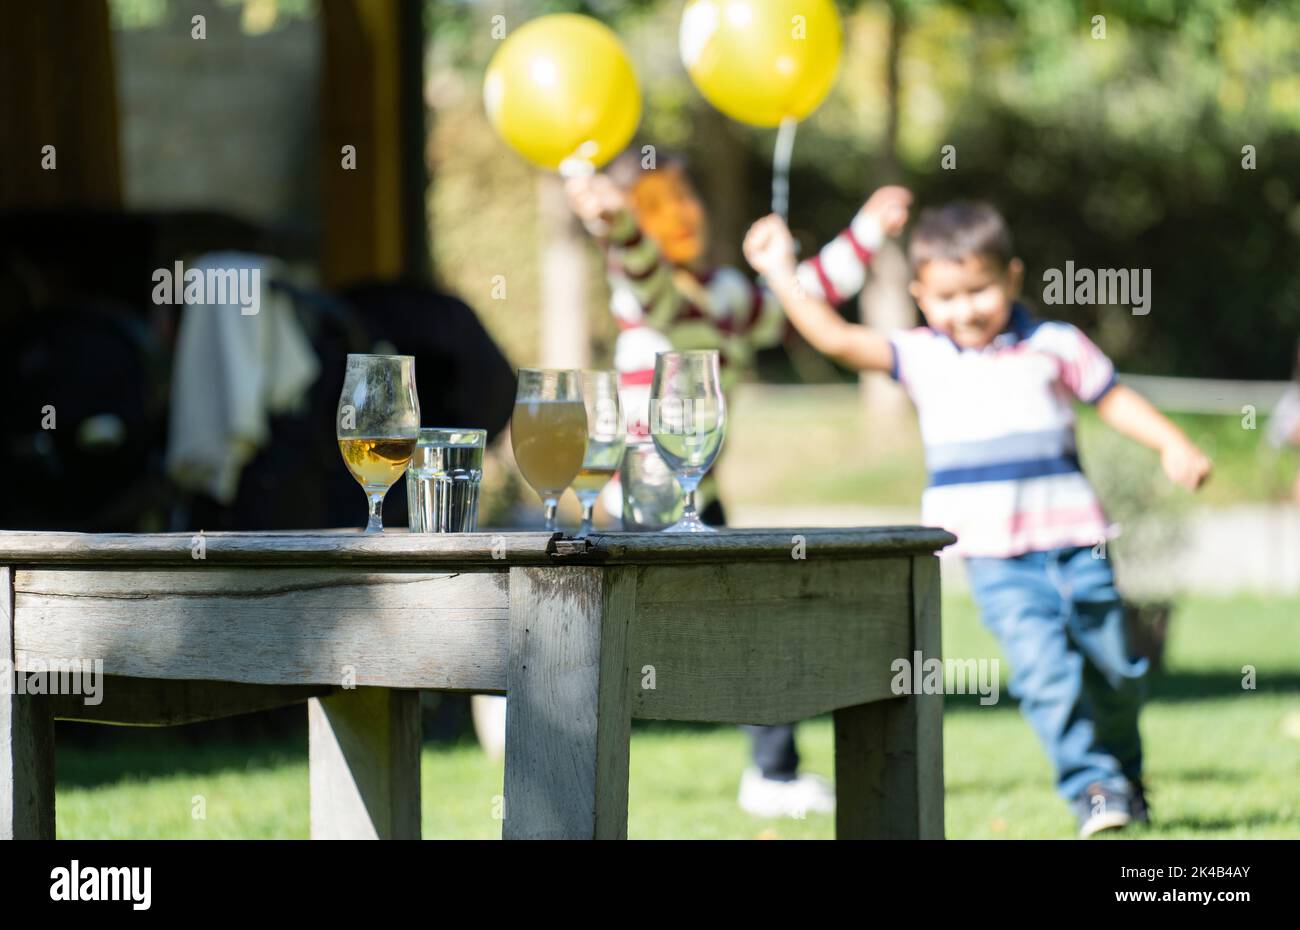 Glasses with drinks on a vintage table during a party. Happy children running with yellow balloons on blurred background Stock Photo